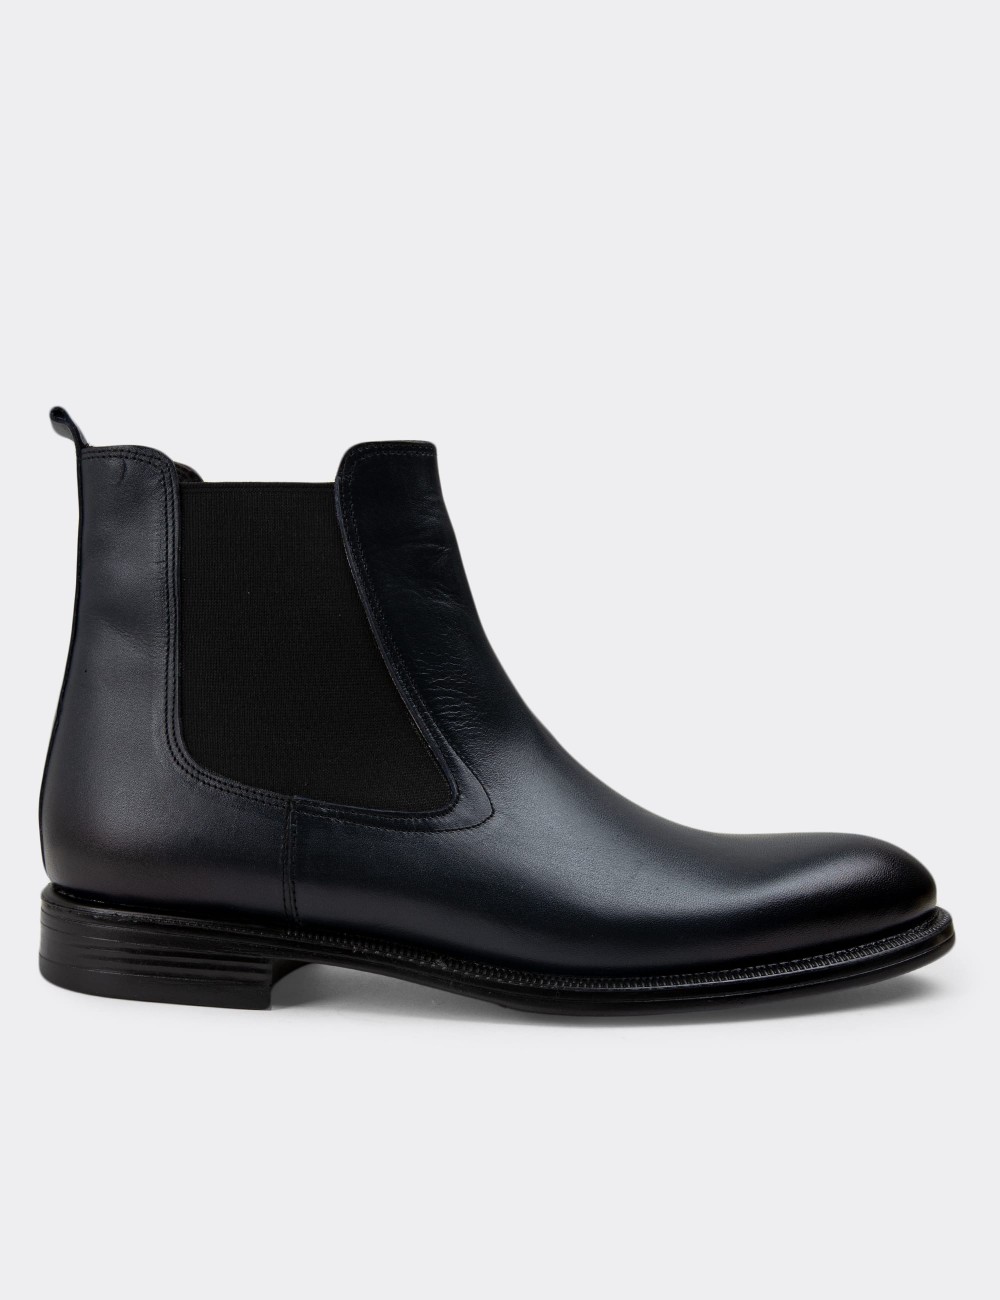 Navy Leather Chelsea Boots - 01919MLCVC01